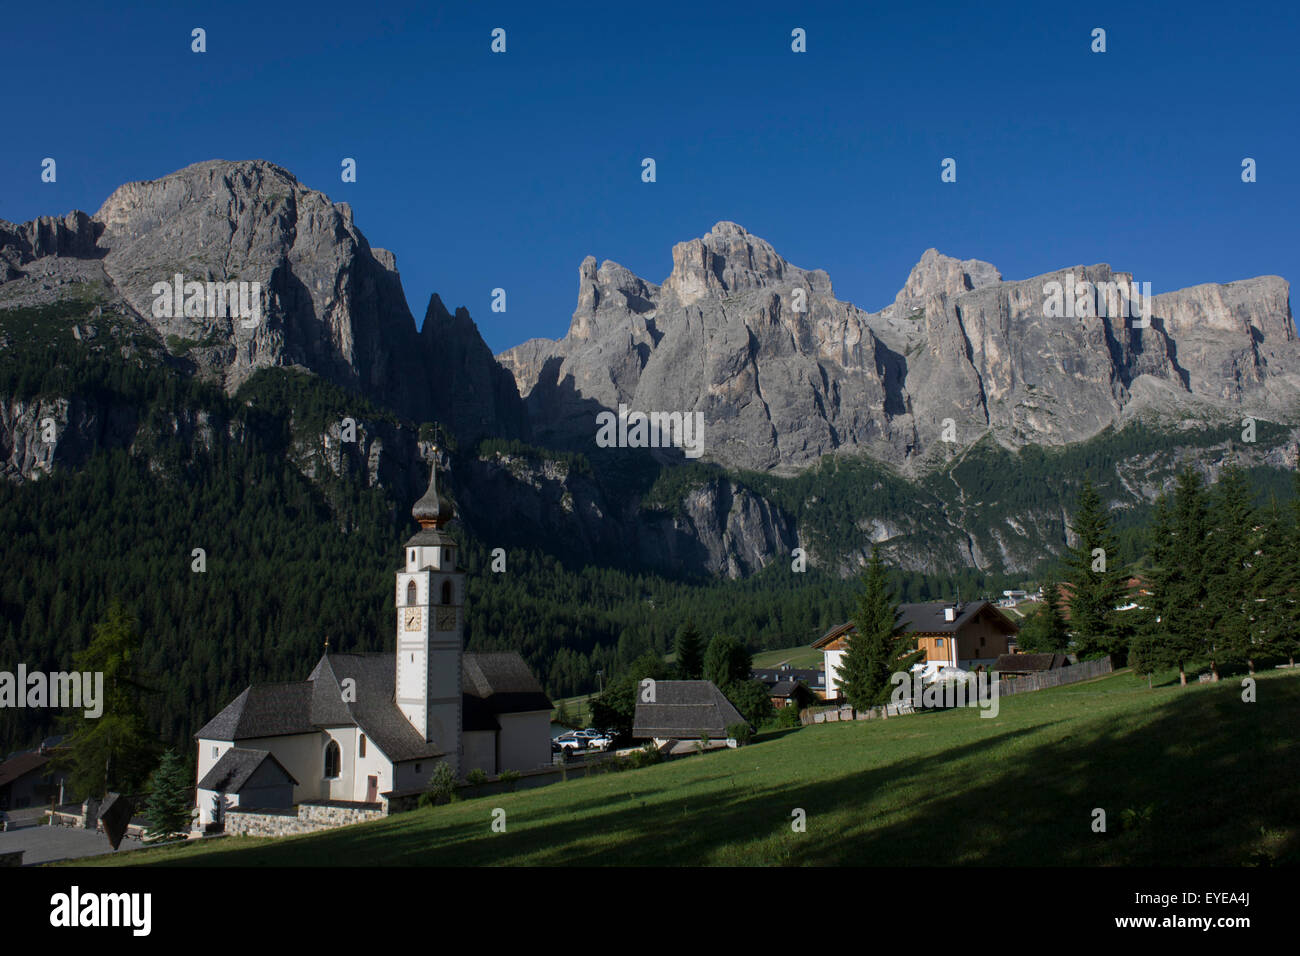 The church at Colfosco surrounded by Dolomites mountains, south Tyrol, Italy. Stock Photo